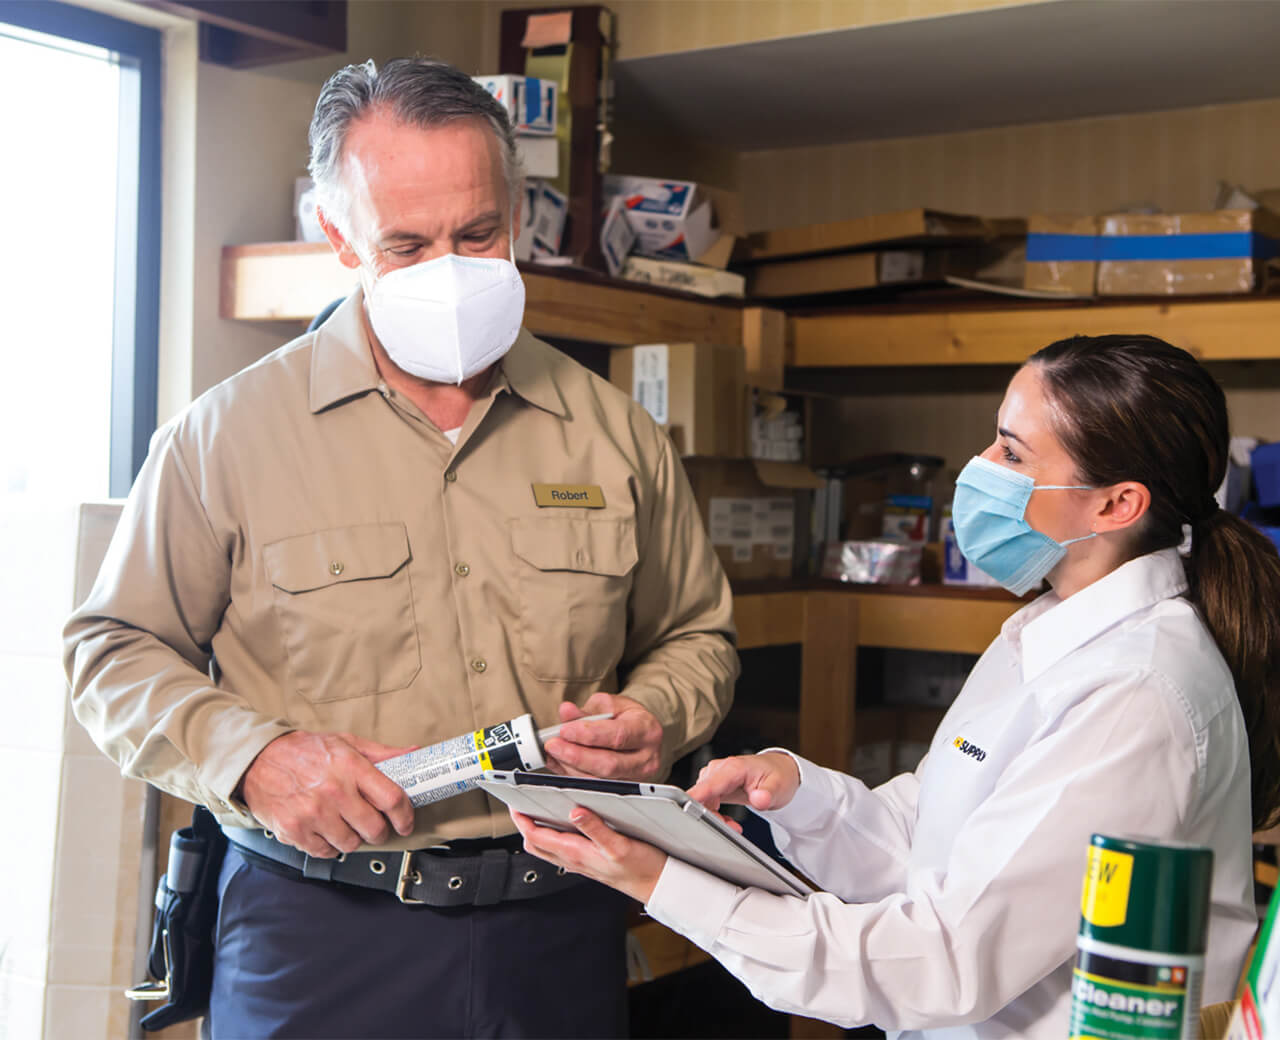 2 HD Supply employees wearing masks and looking at a tablet in a warehouse.